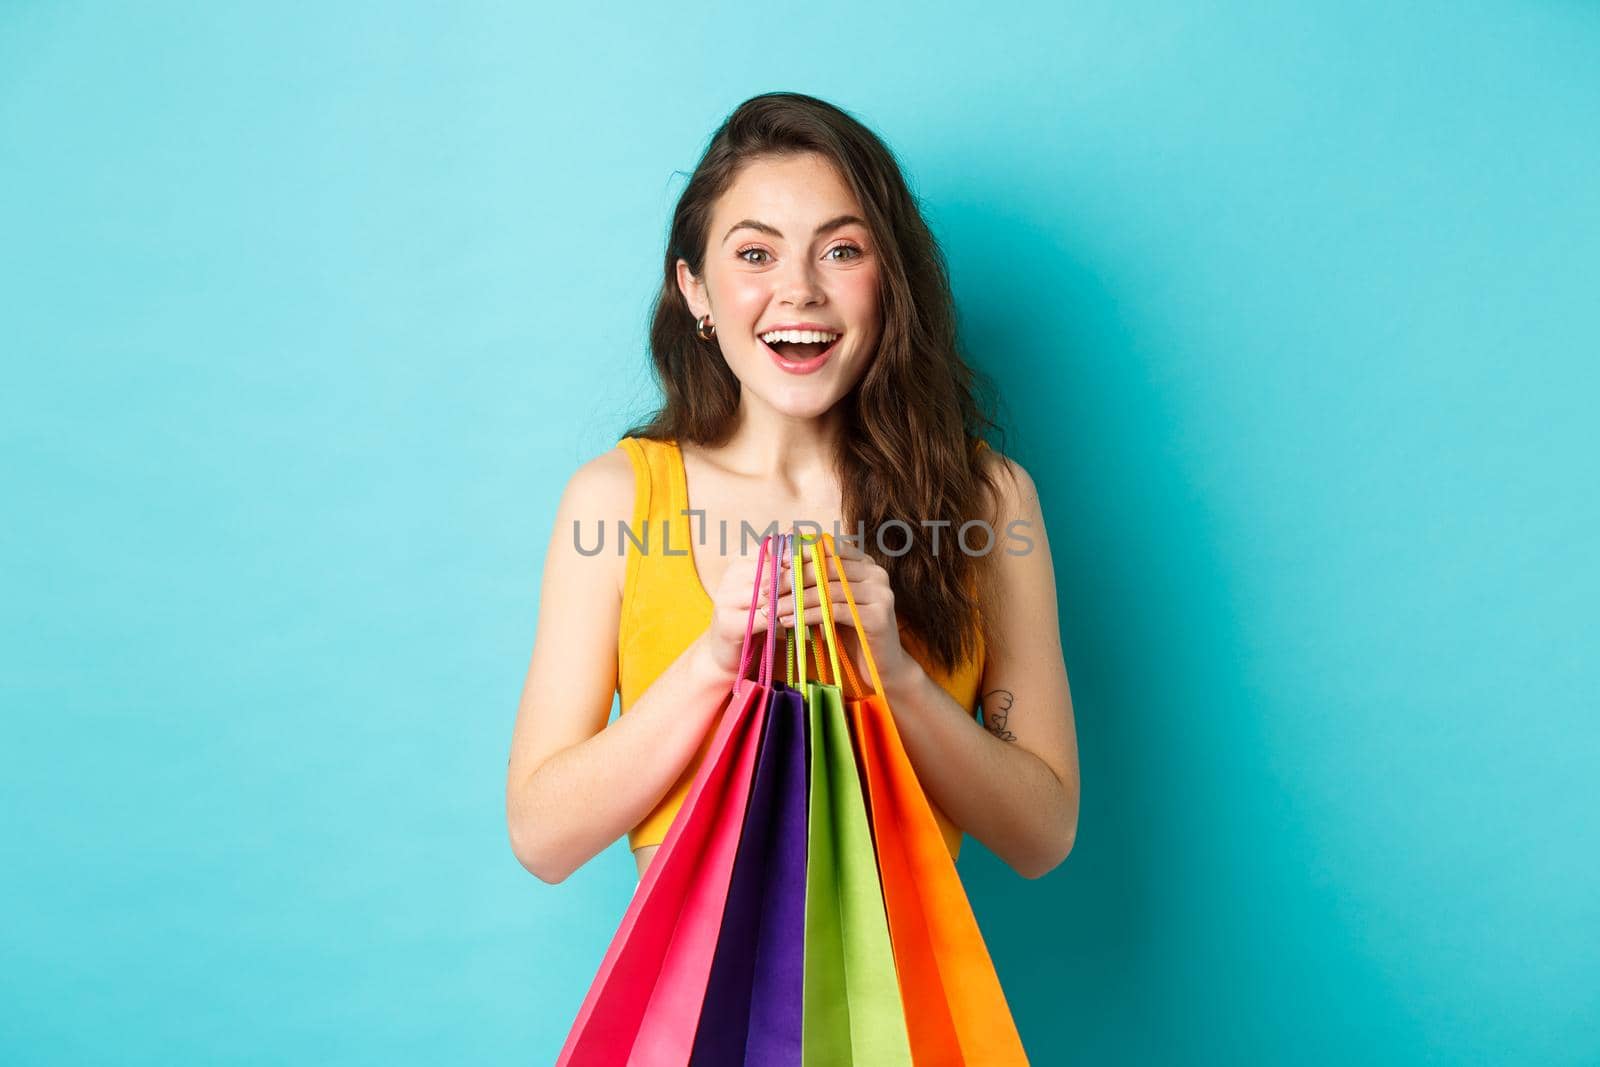 Young pretty woman holding shopping bags, smiling excited at camera, buying with discounts, standing over blue background.